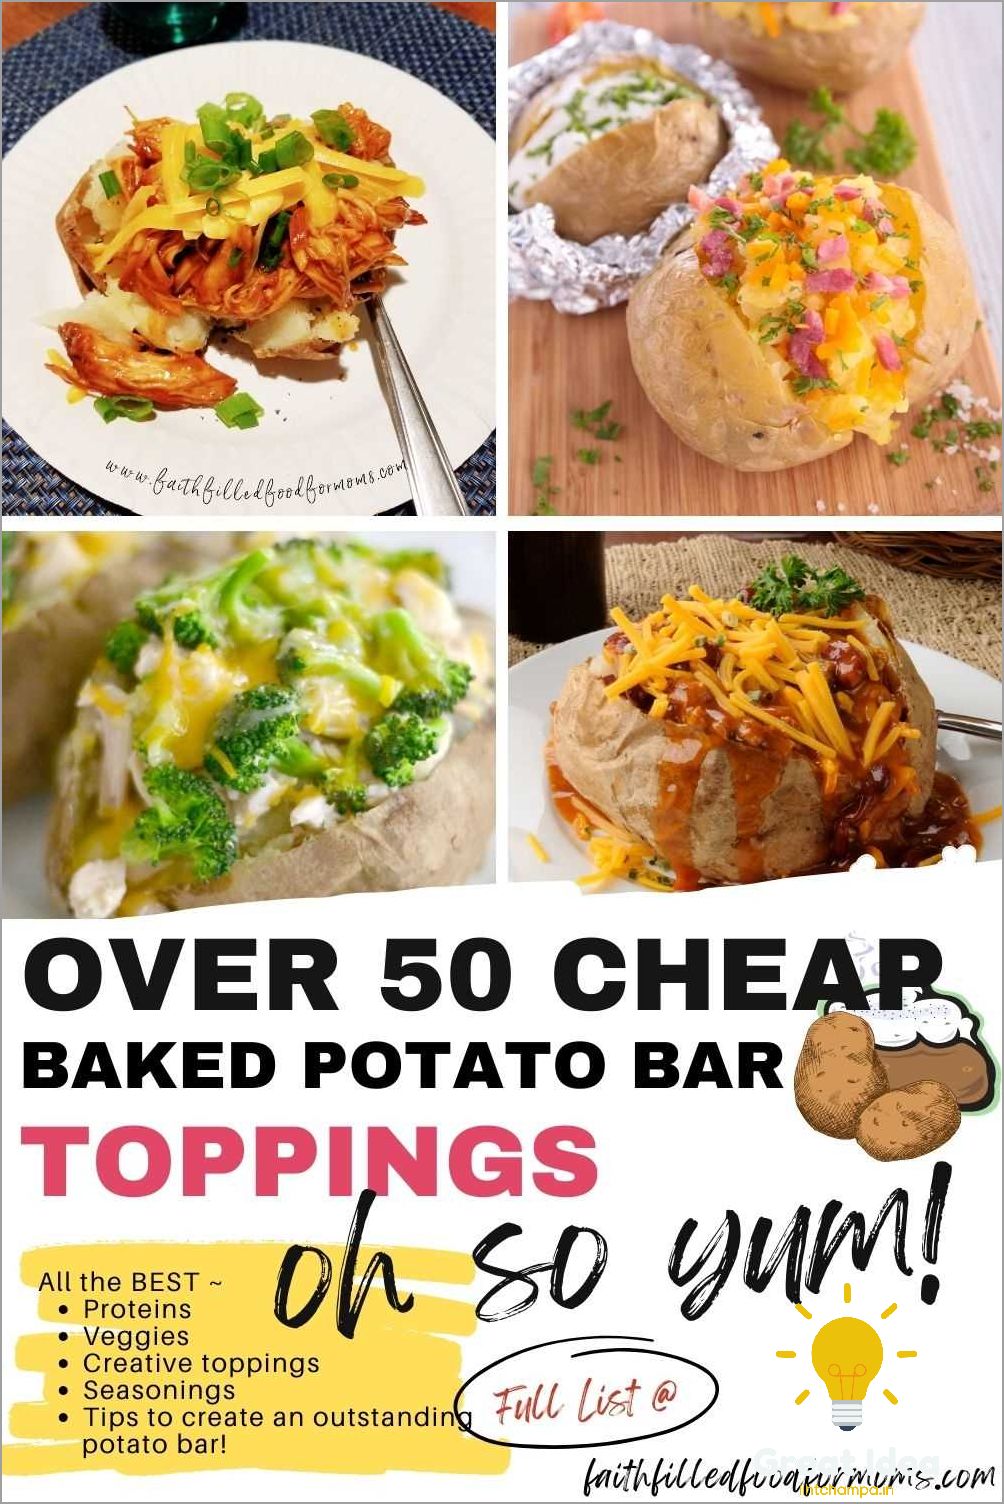 Ideas for a Potato Bar Delicious and Creative Toppings for Your Spuds